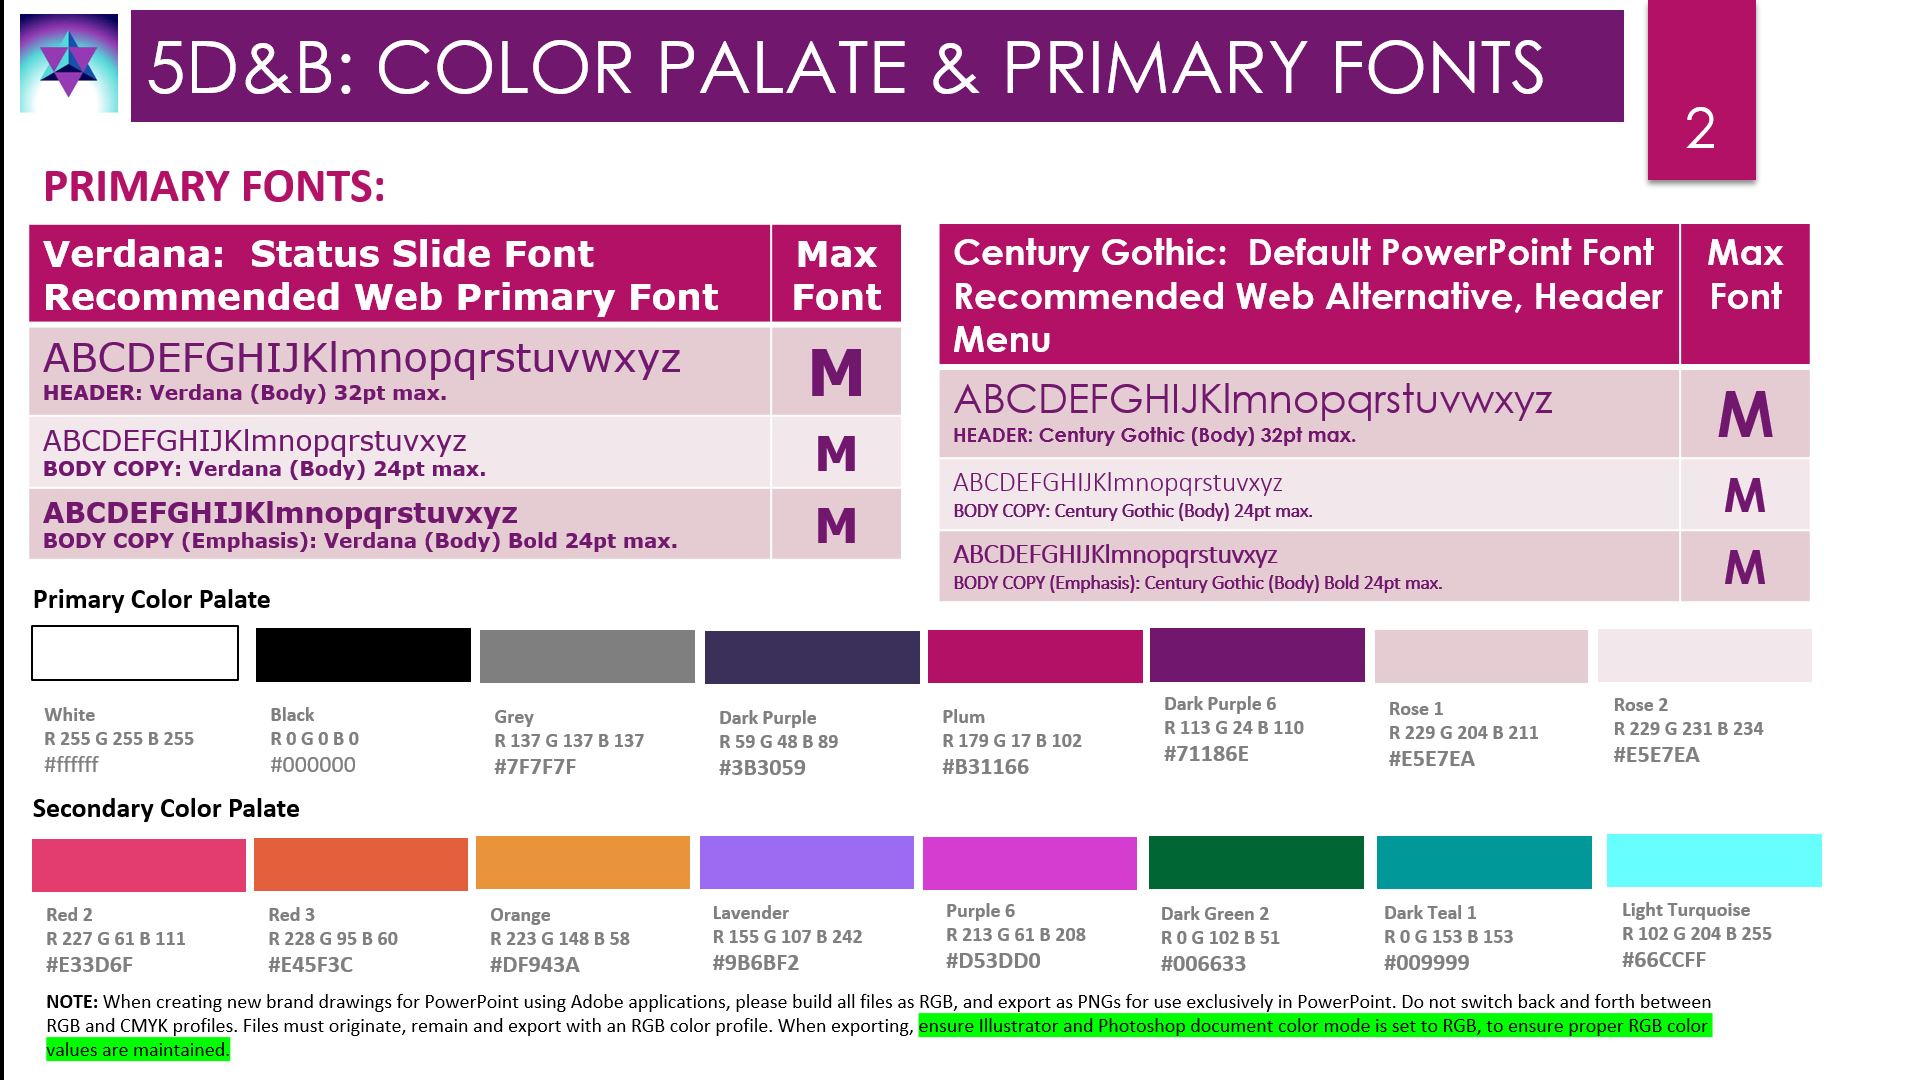 5D&B_COLOR PALATE & PRIMARY FONTS_Image